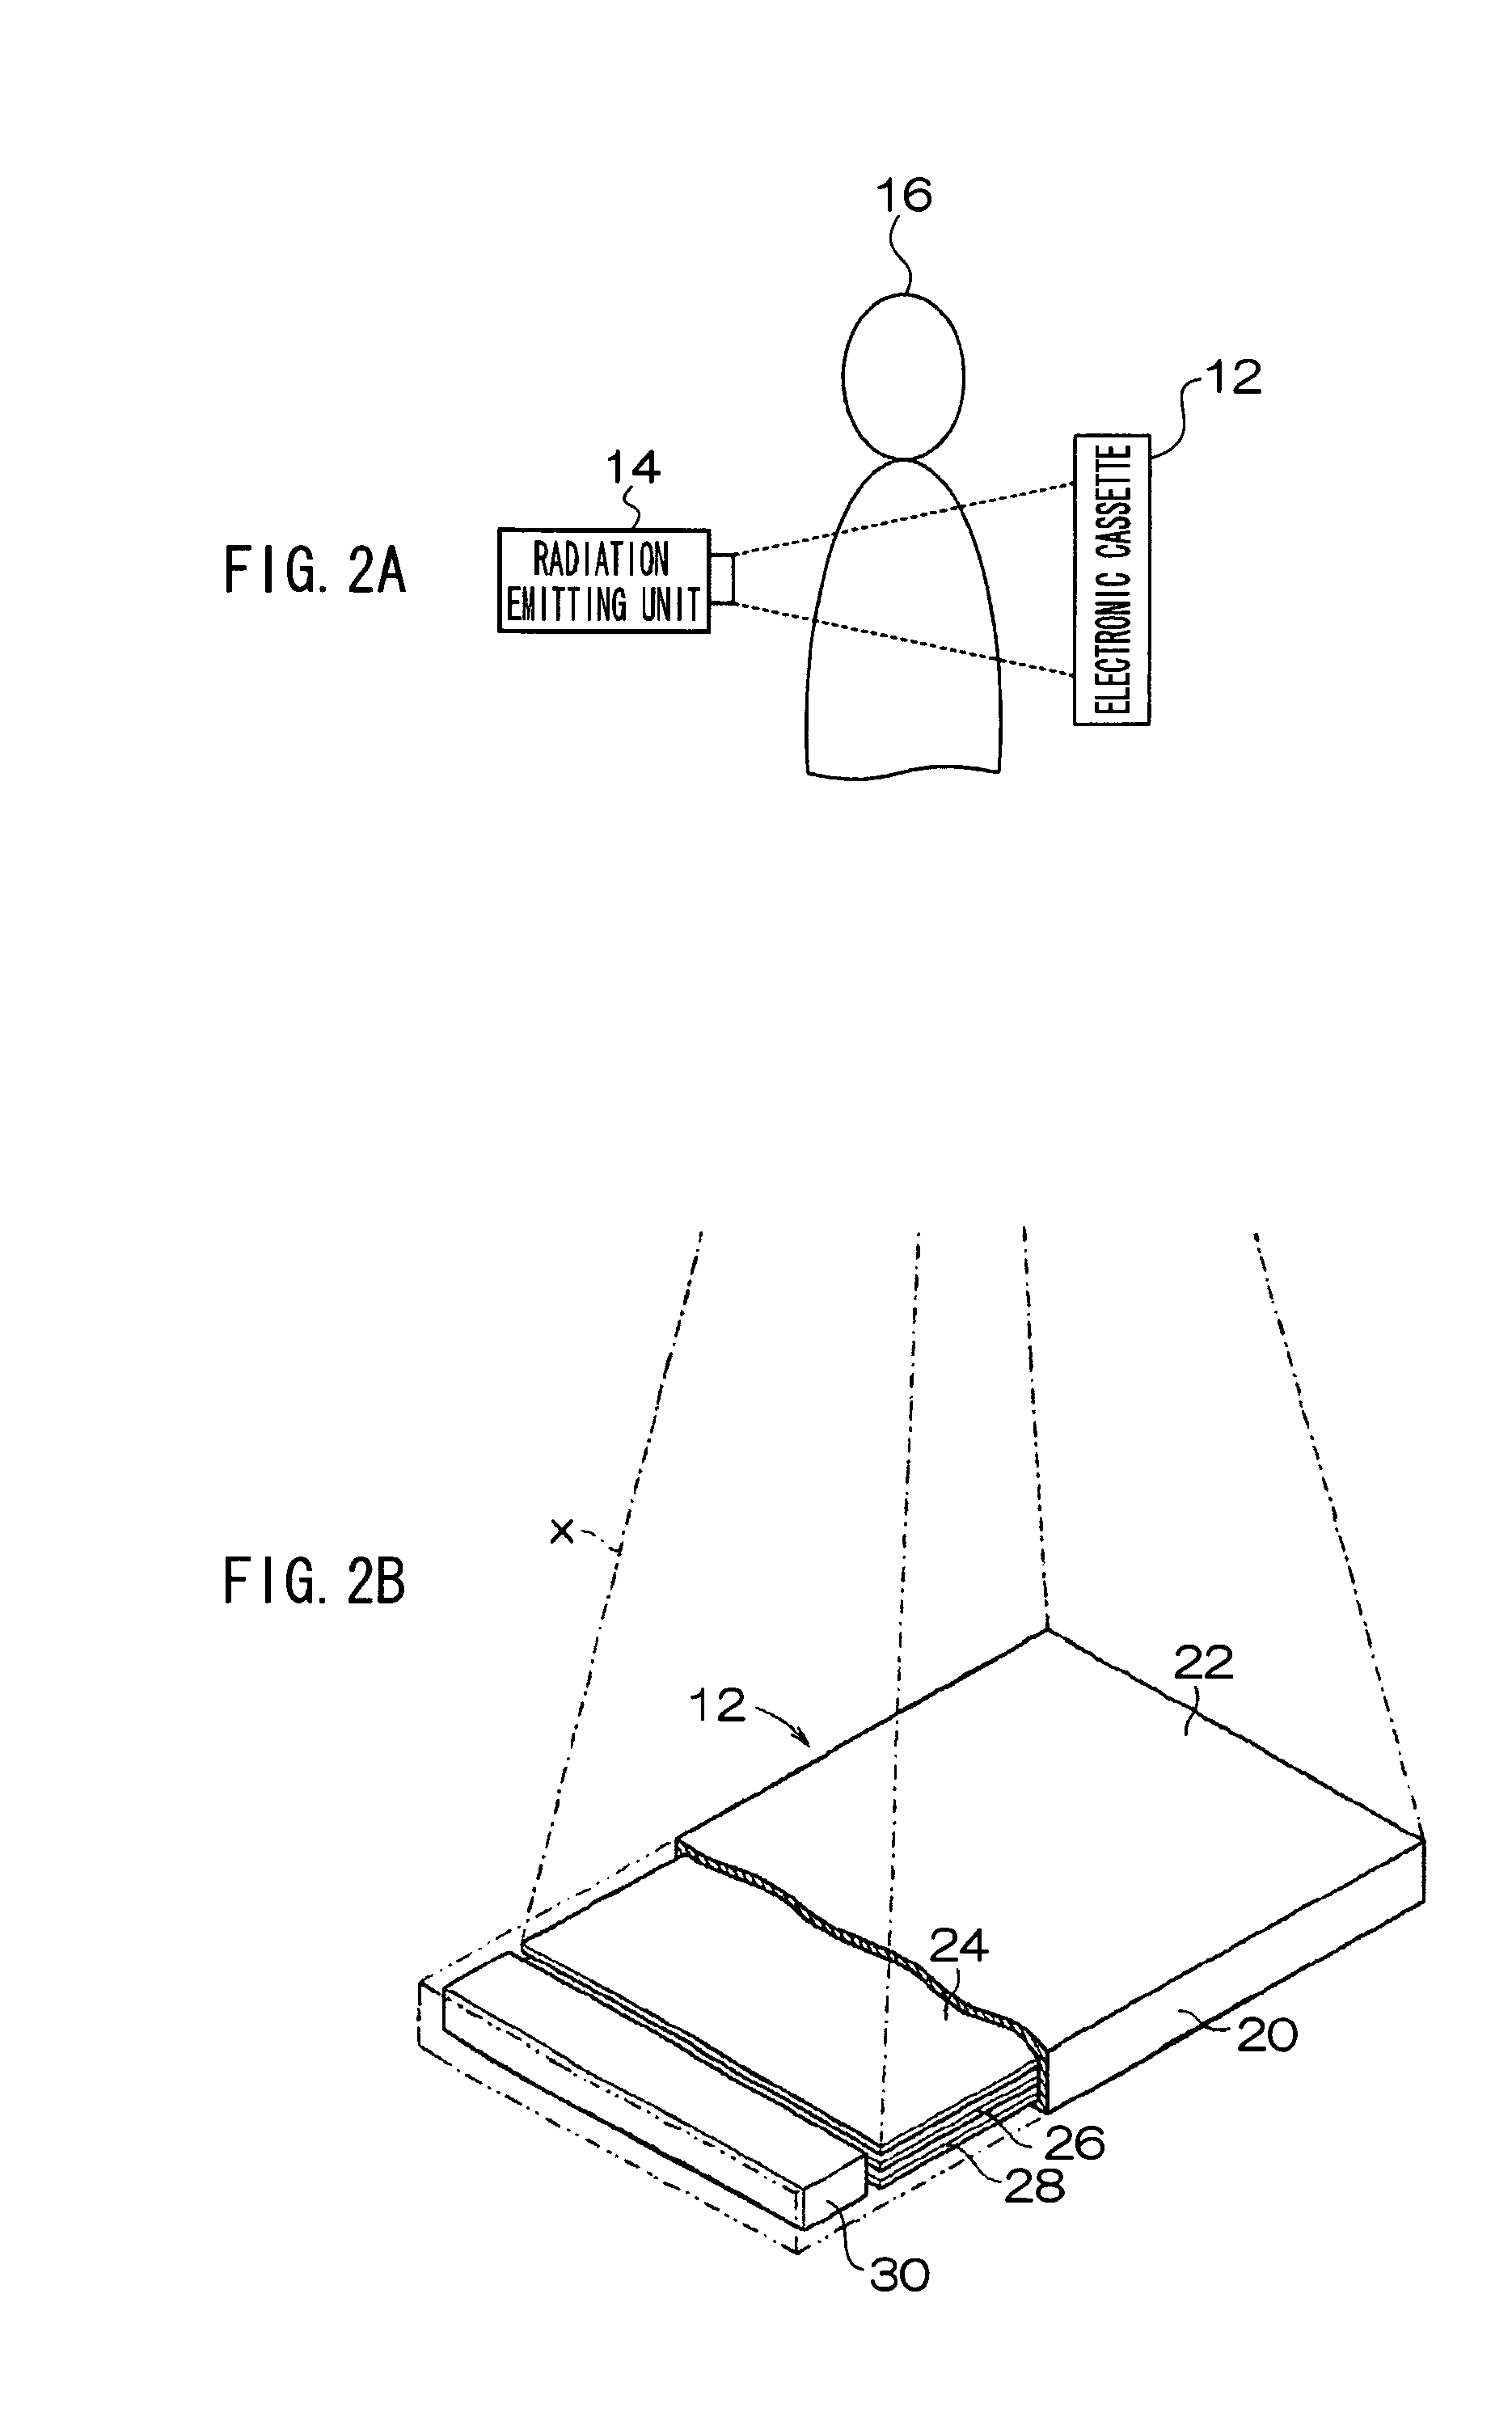 Electronic device for transmitting and receiving information by means of laser light